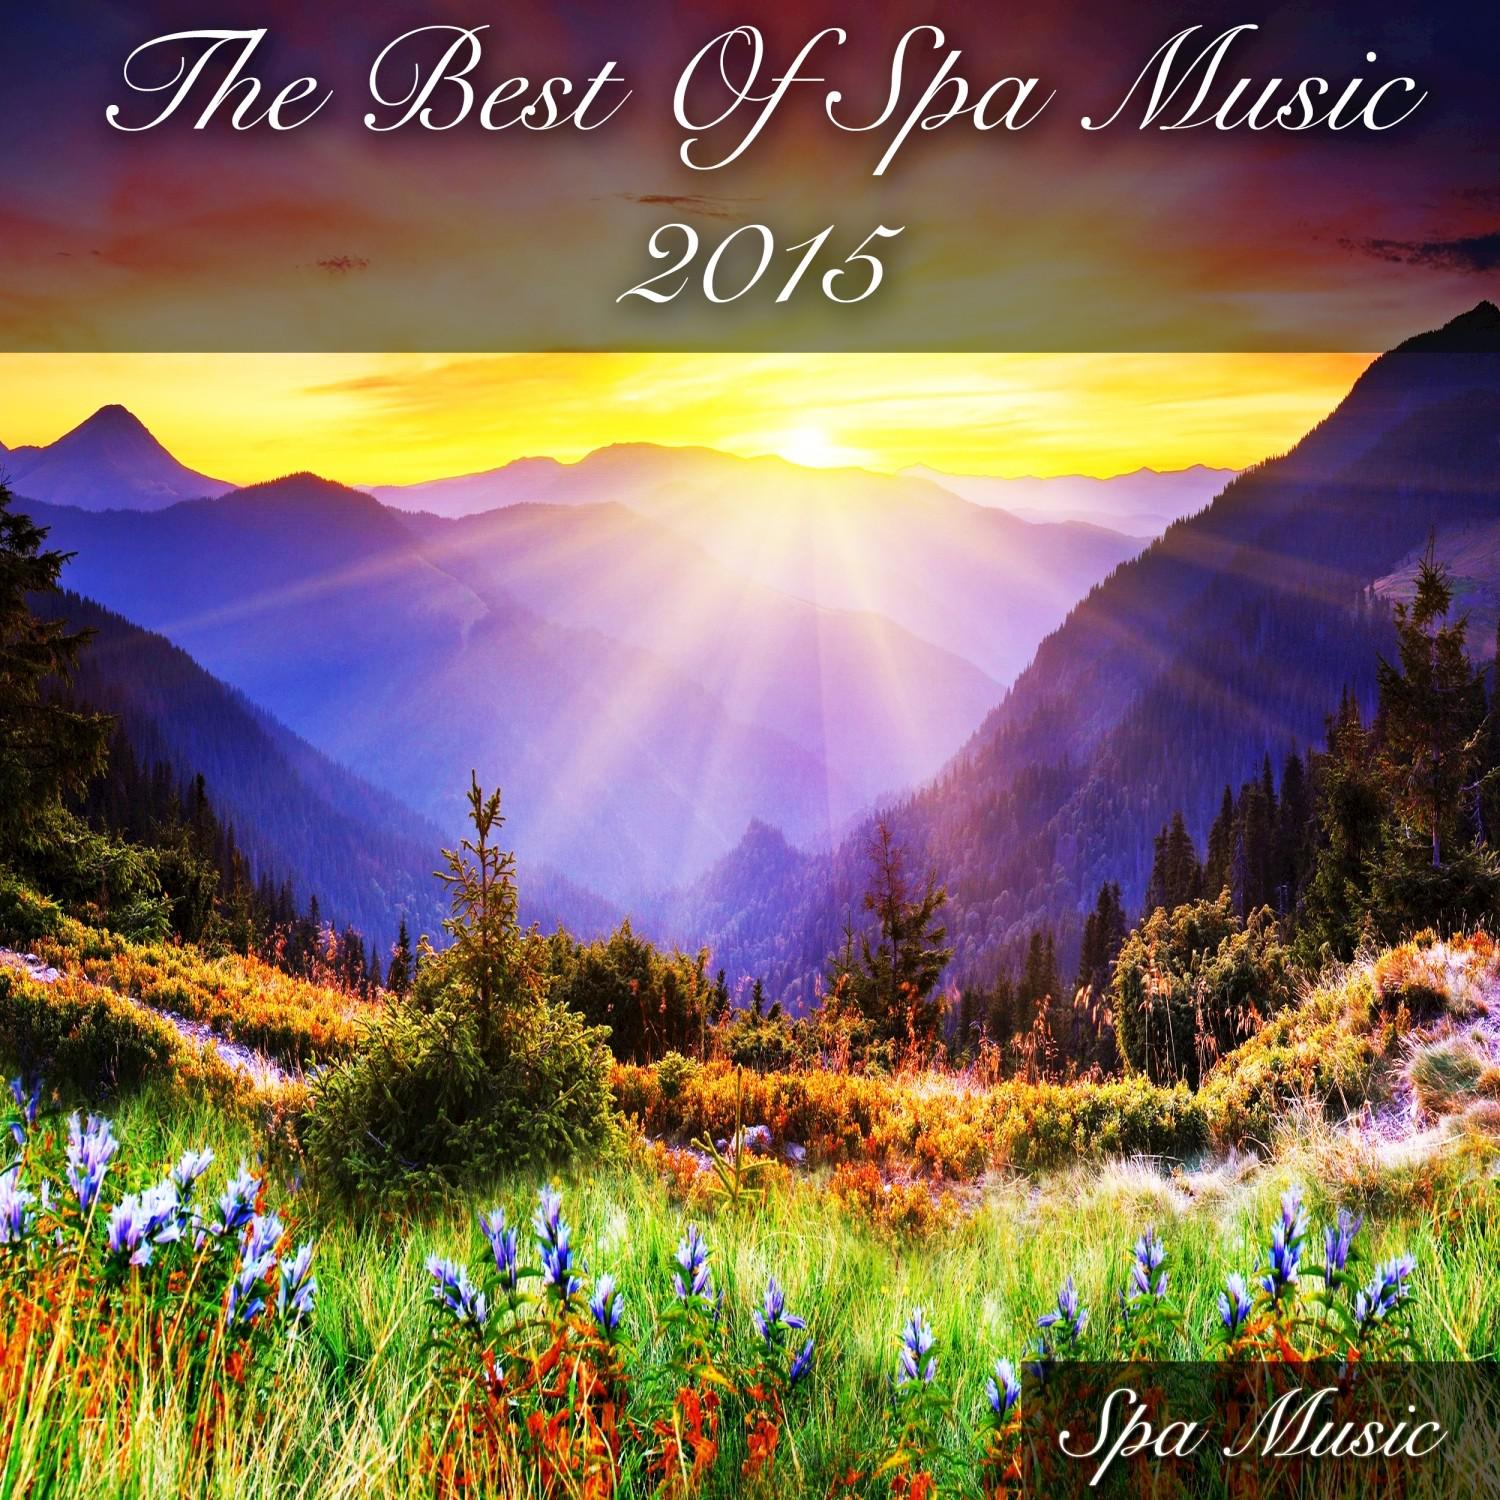 The Best of Spa Music 2015